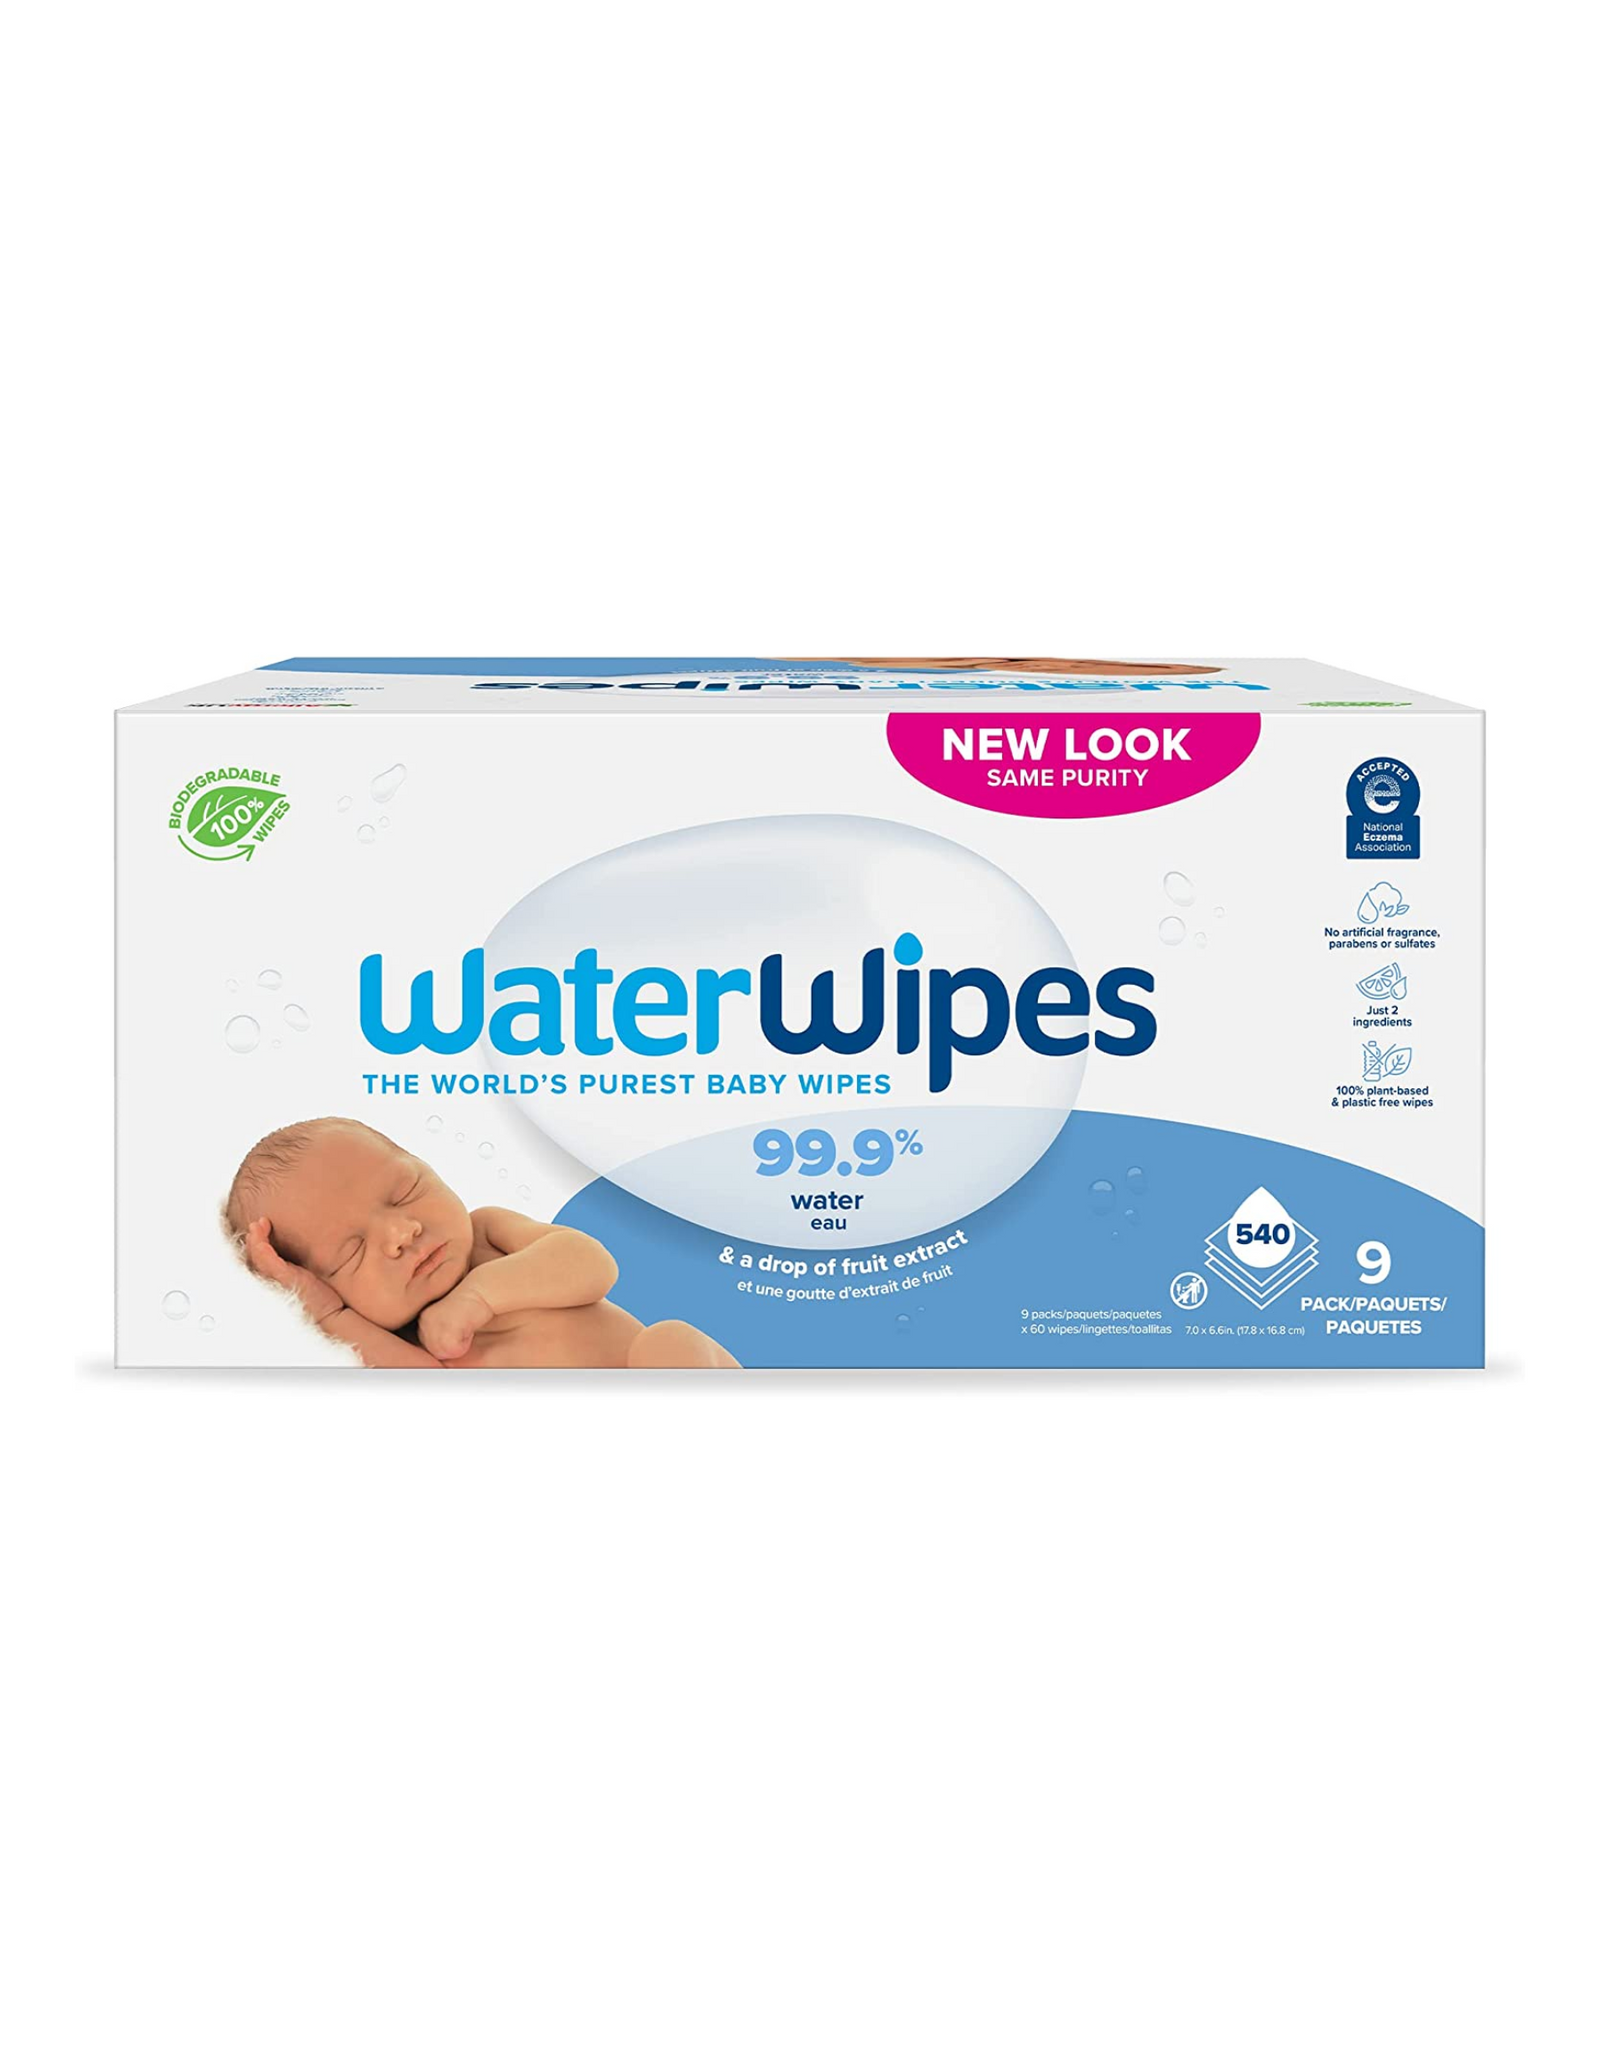 WaterWipes Biodegradable Original Baby Wipes, Unscented & Hypoallergenic for Sensitive Skin 99.9% Water Based Wipes, 540 Ct (9 packs) Packaging May Vary